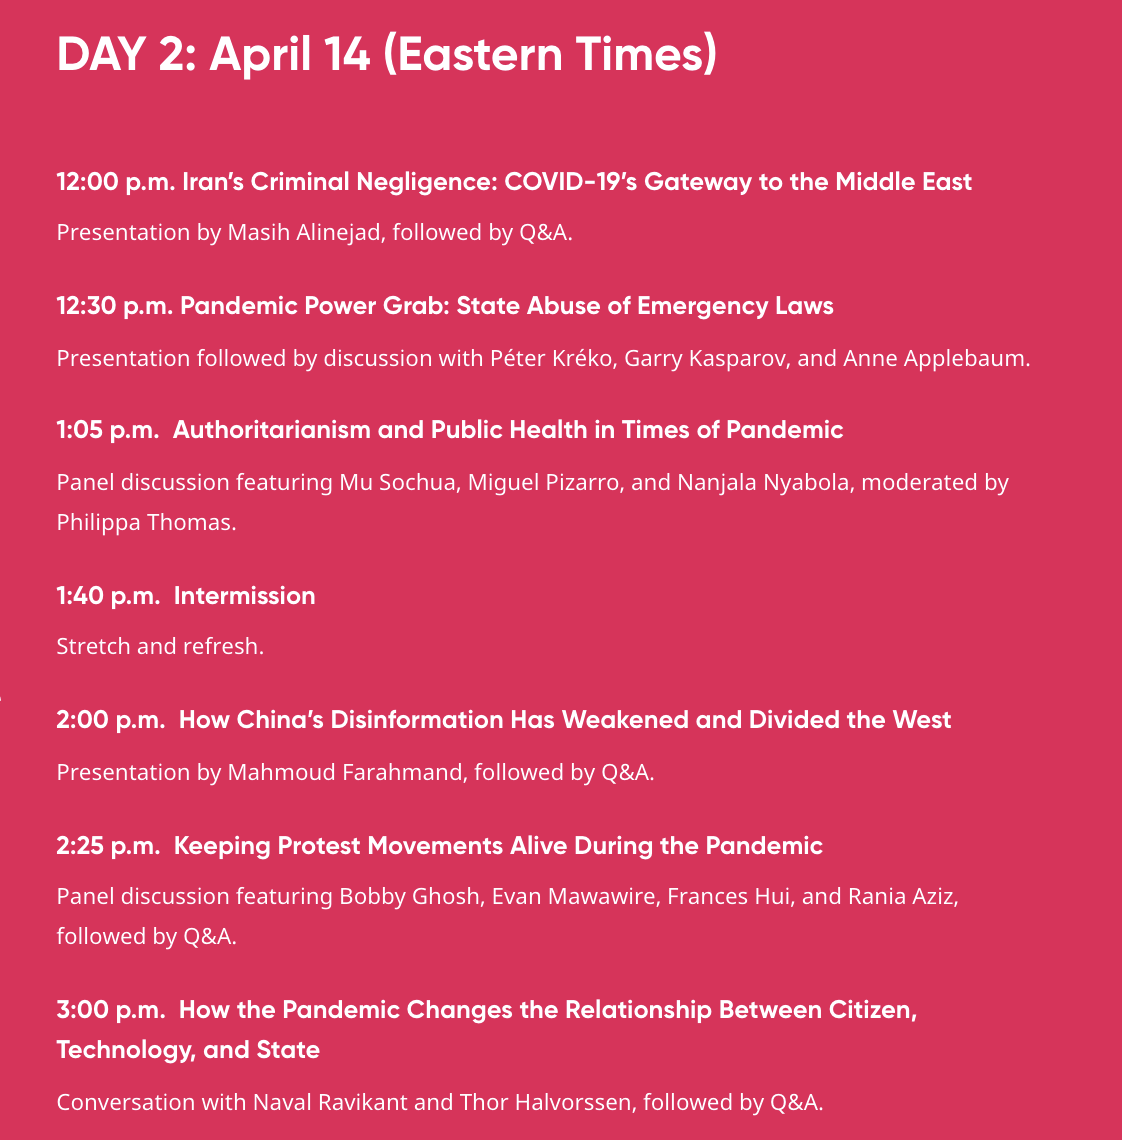 Day 2 of CovidCon is kicks off with @AlinejadMasih, the Iranian journalist who launched #MyStealthyFreedom.

Followed by @Kasparov63, @anneapplebaum, @PhilippaBBC  on authoritarianism & public health.

Ends with @naval & @ThorHalvorssen.

Stream live here: crowdcast.io/e/COVIDCon/8